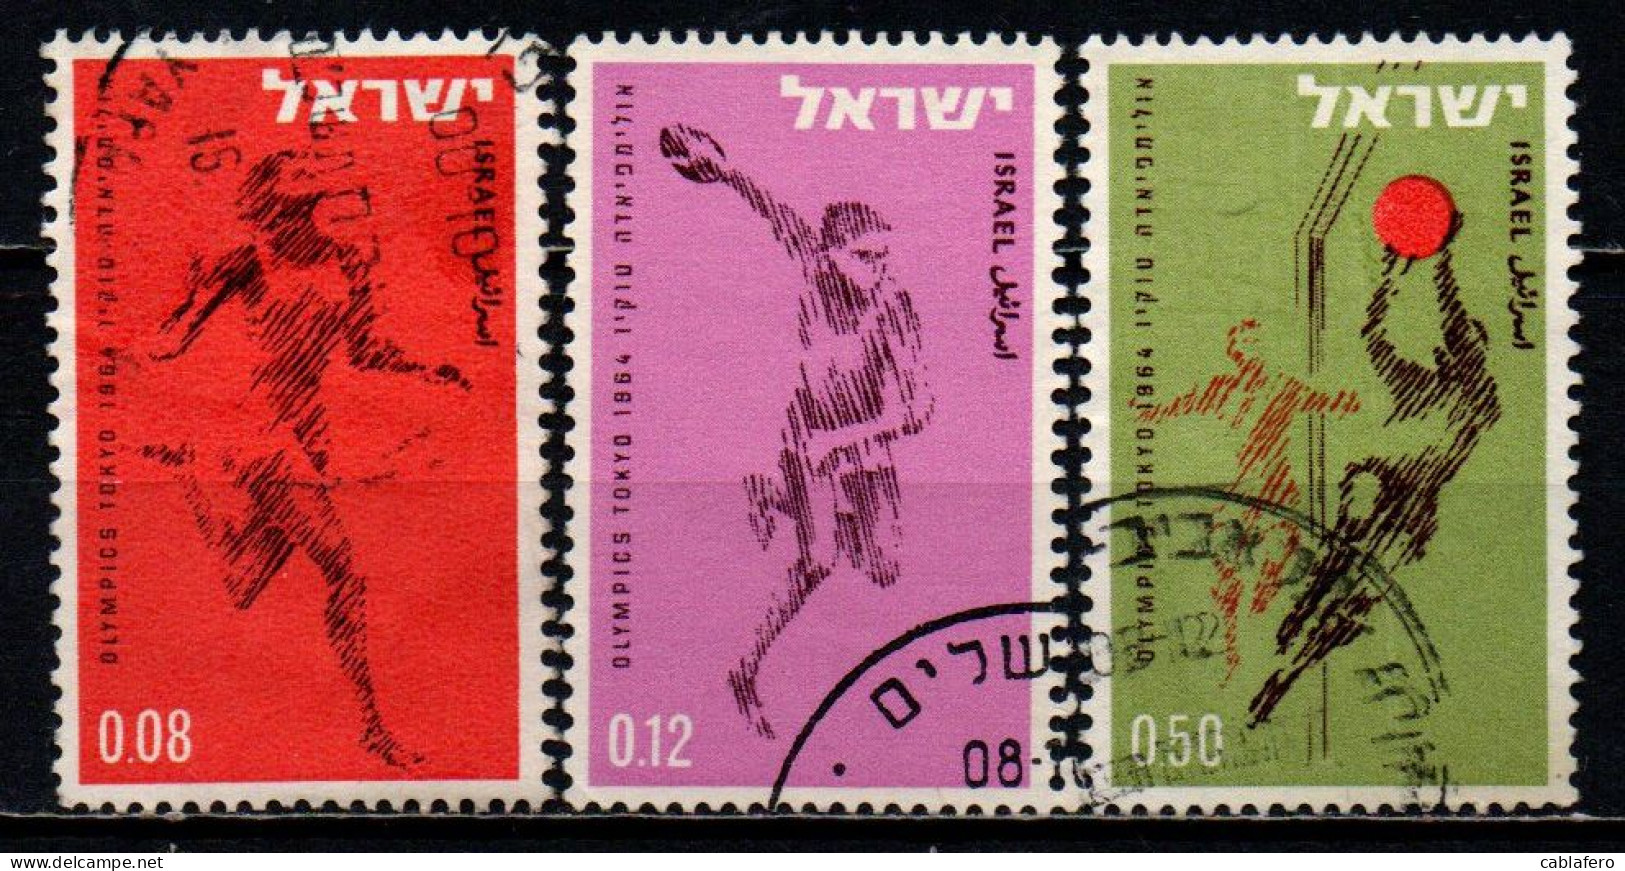 ISRAELE - 1964 - Israel’s Participation In The 18th Olympic Games, Tokyo, Oct. 10-25 - USATI - Usati (senza Tab)